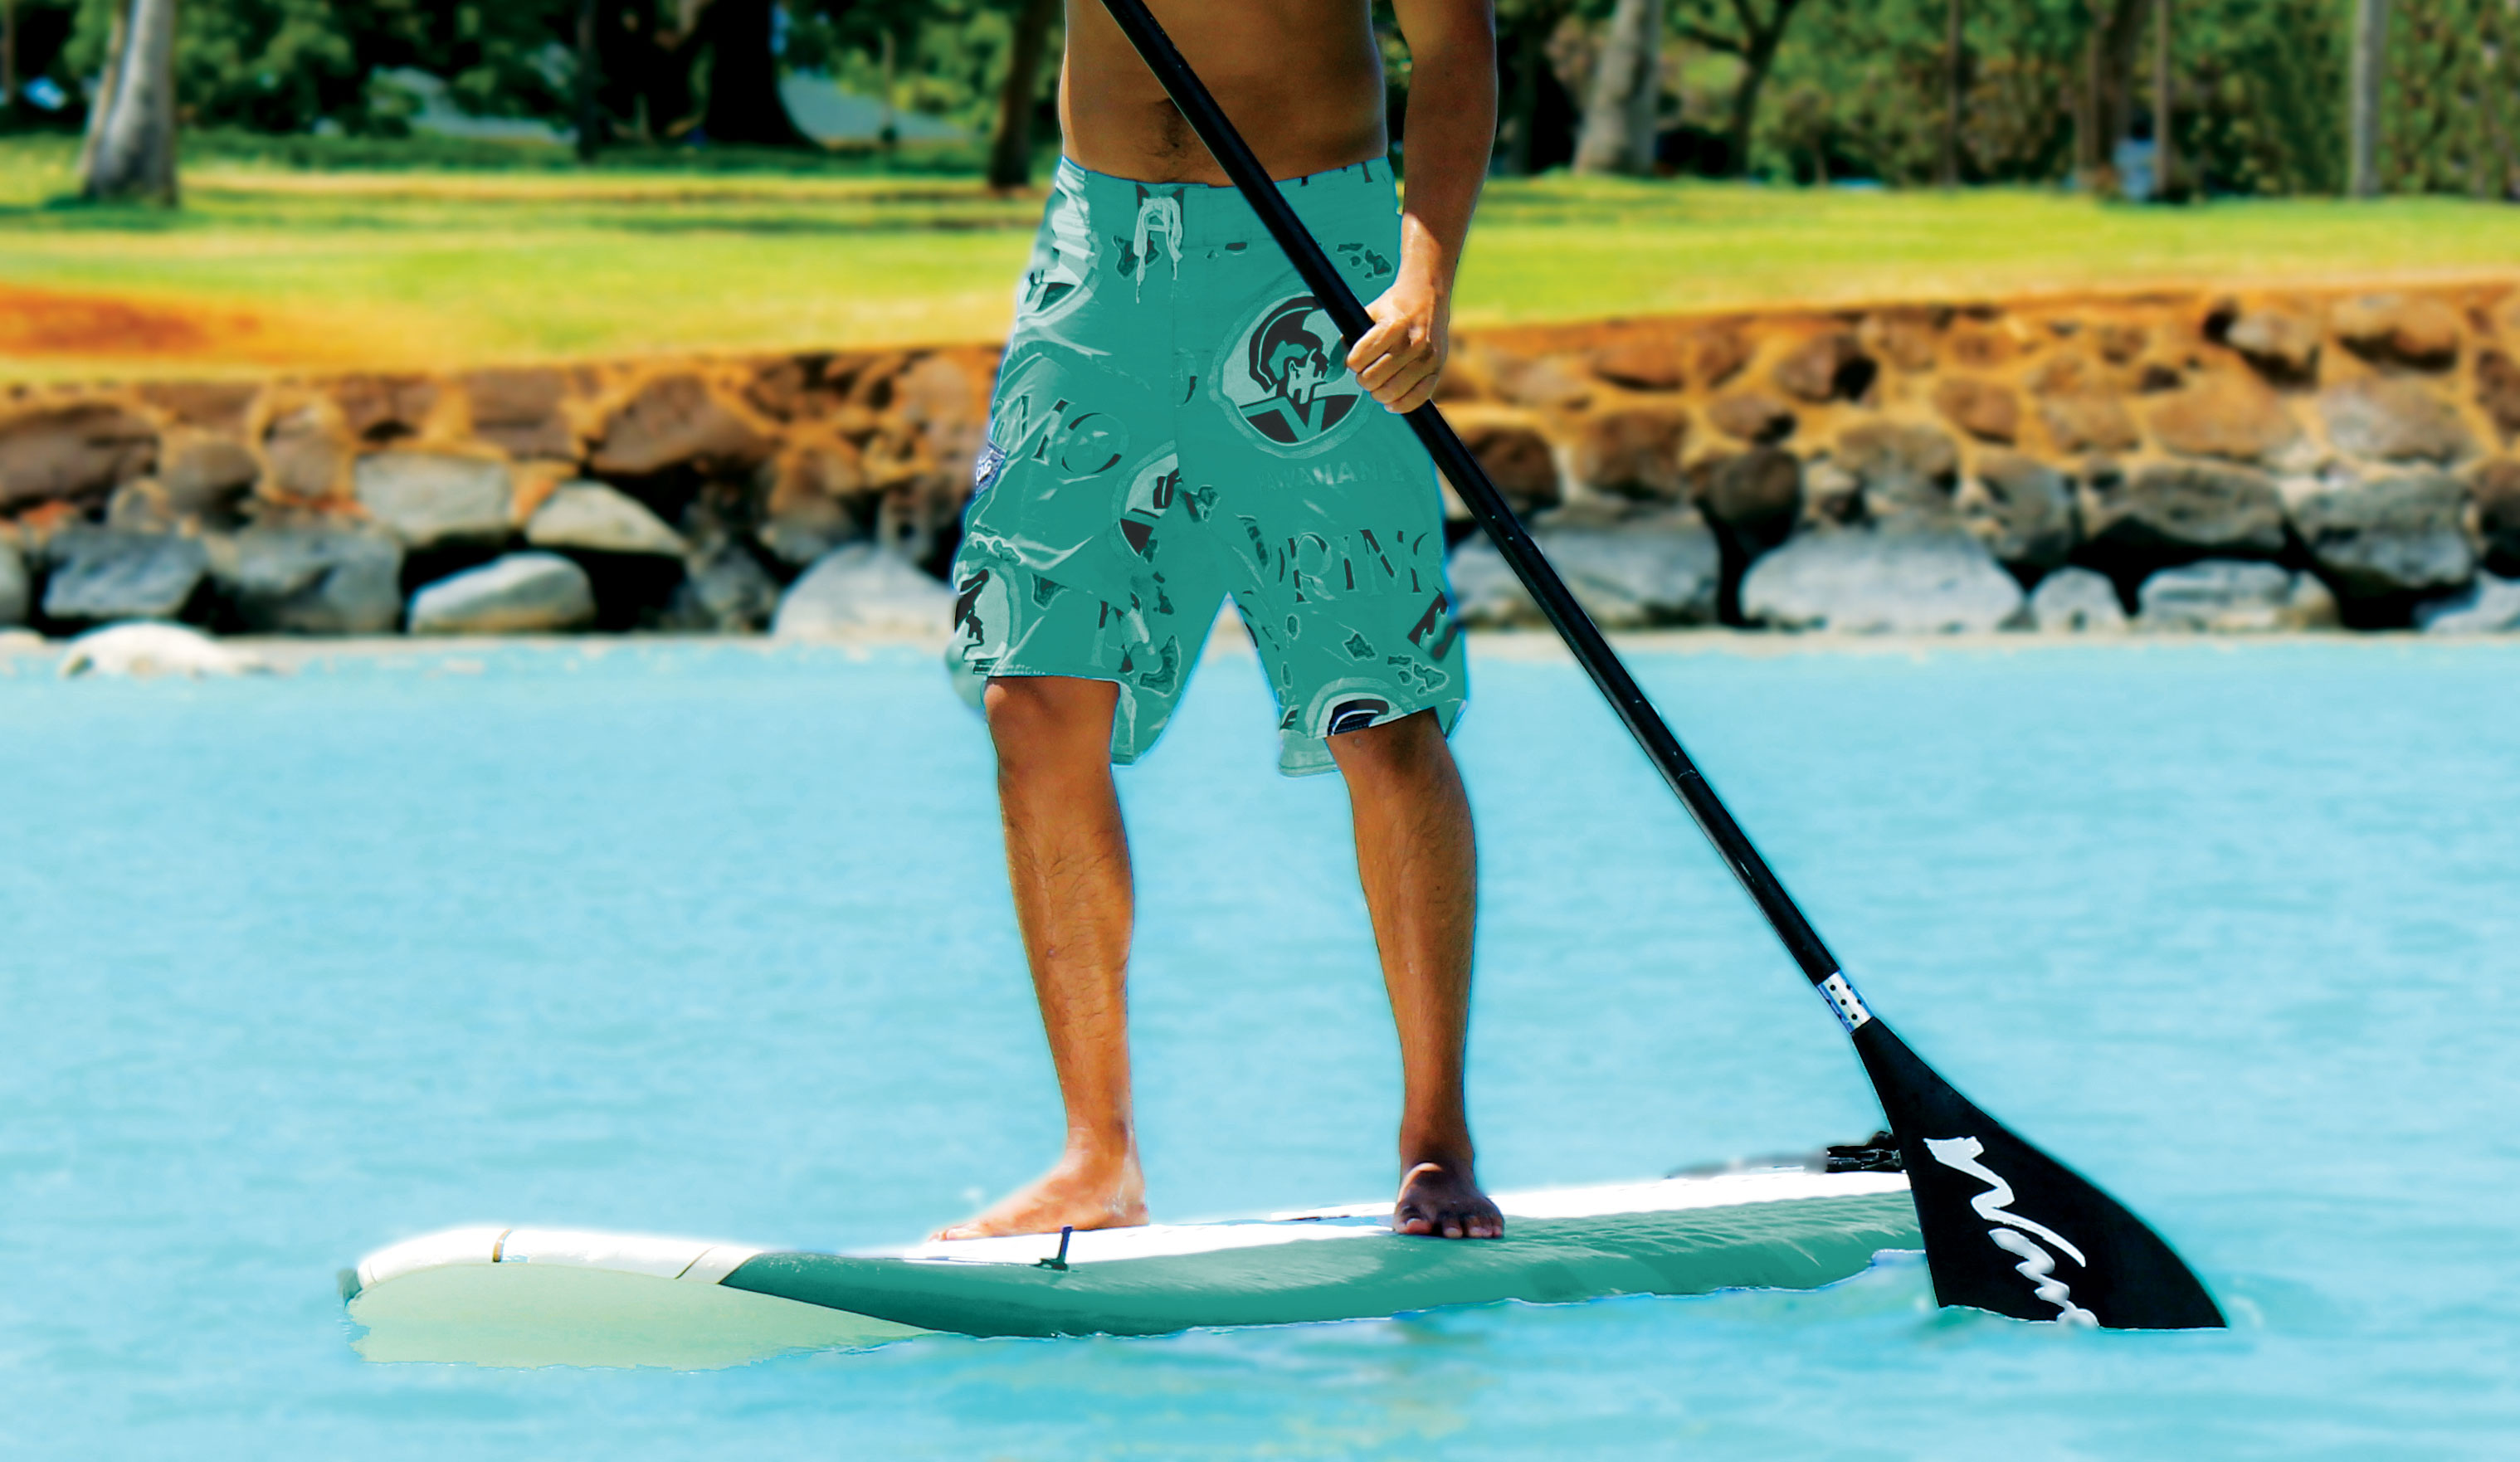 Oahu Stand Up Paddle Boarding | Hawaii Beach Time